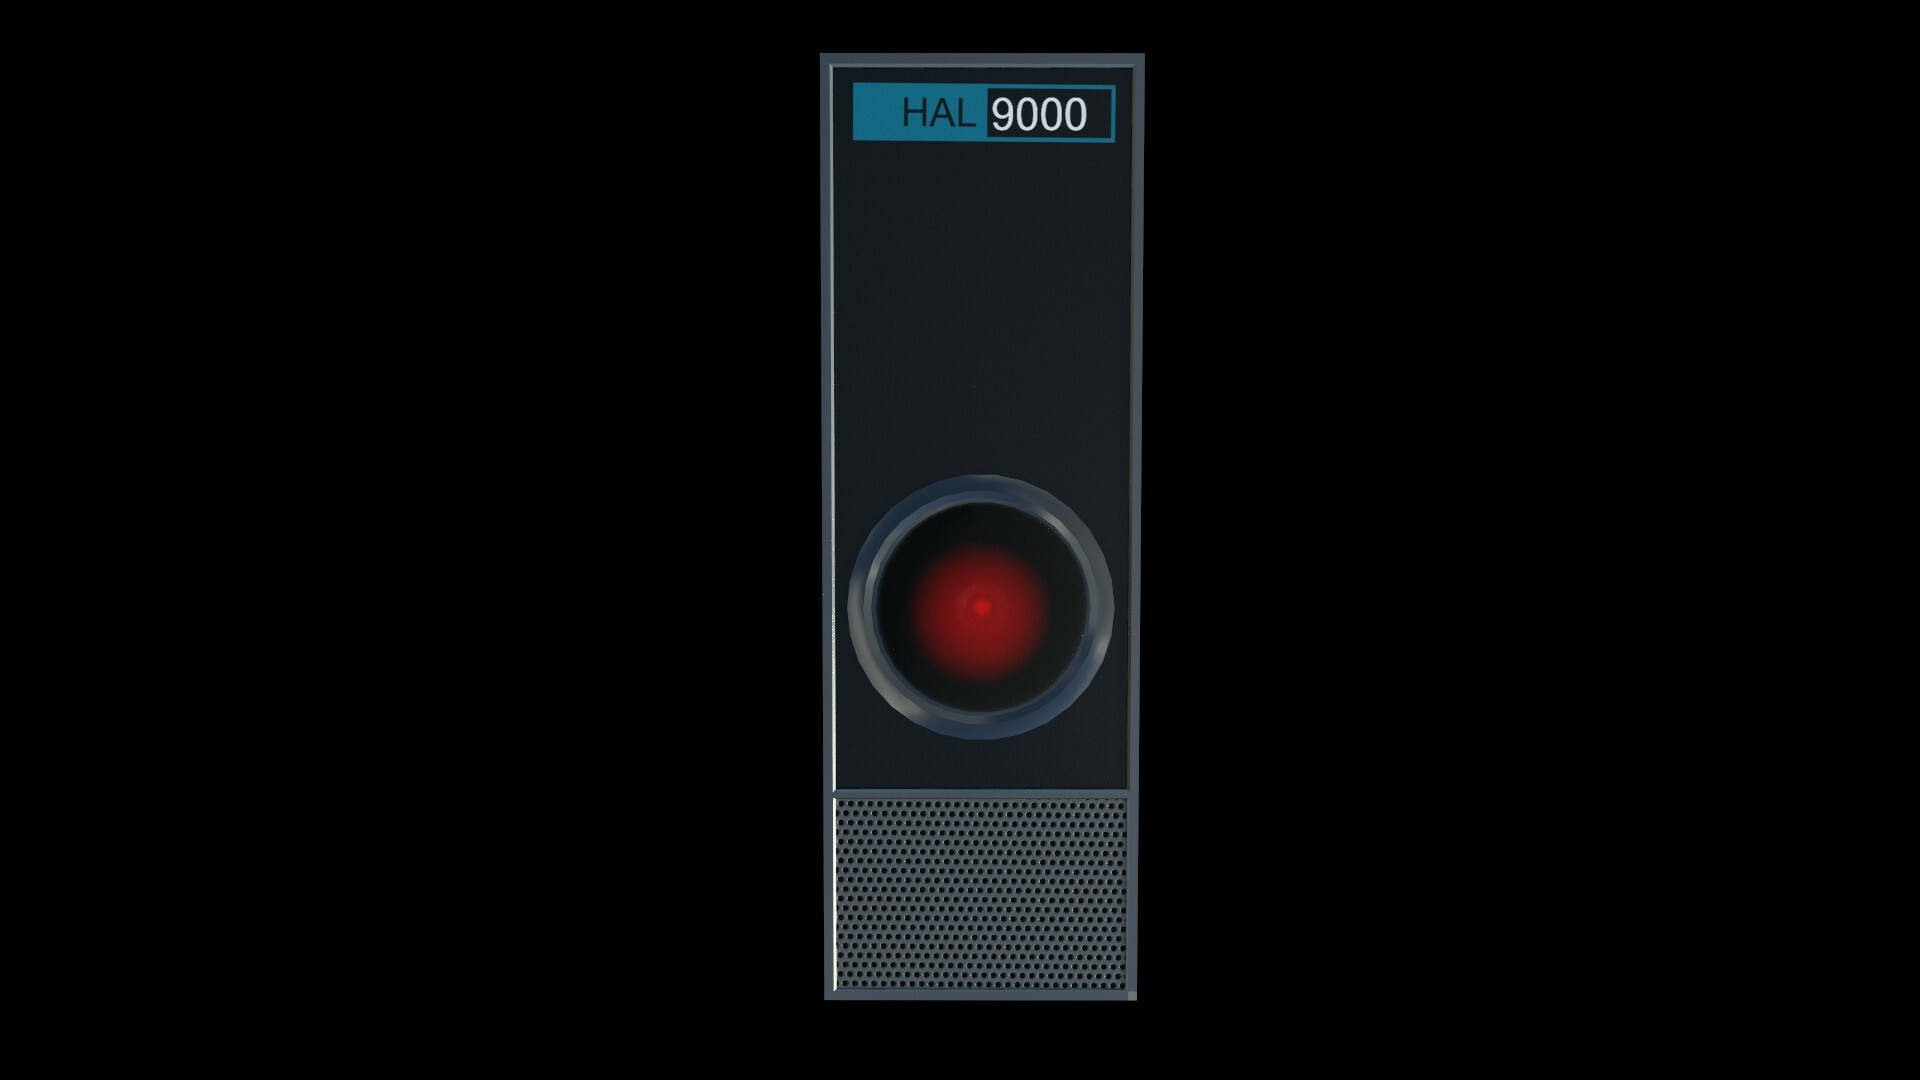 Hal 9000 Supervising The Launch Of A Space Mission. Wallpaper